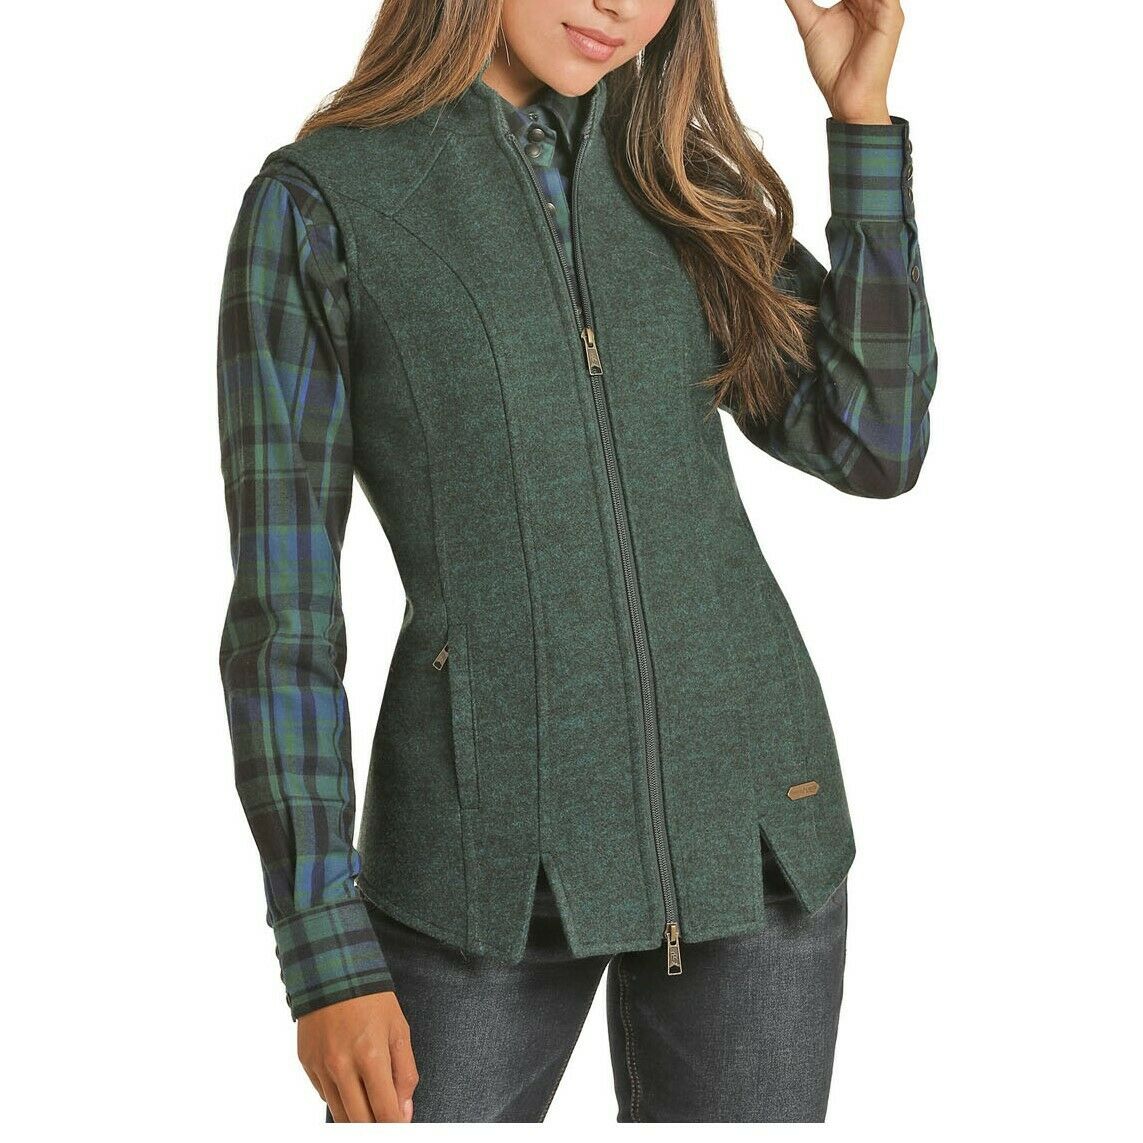 Powder River Outfitters Ladies Green Fitted Vest 58-6648-30